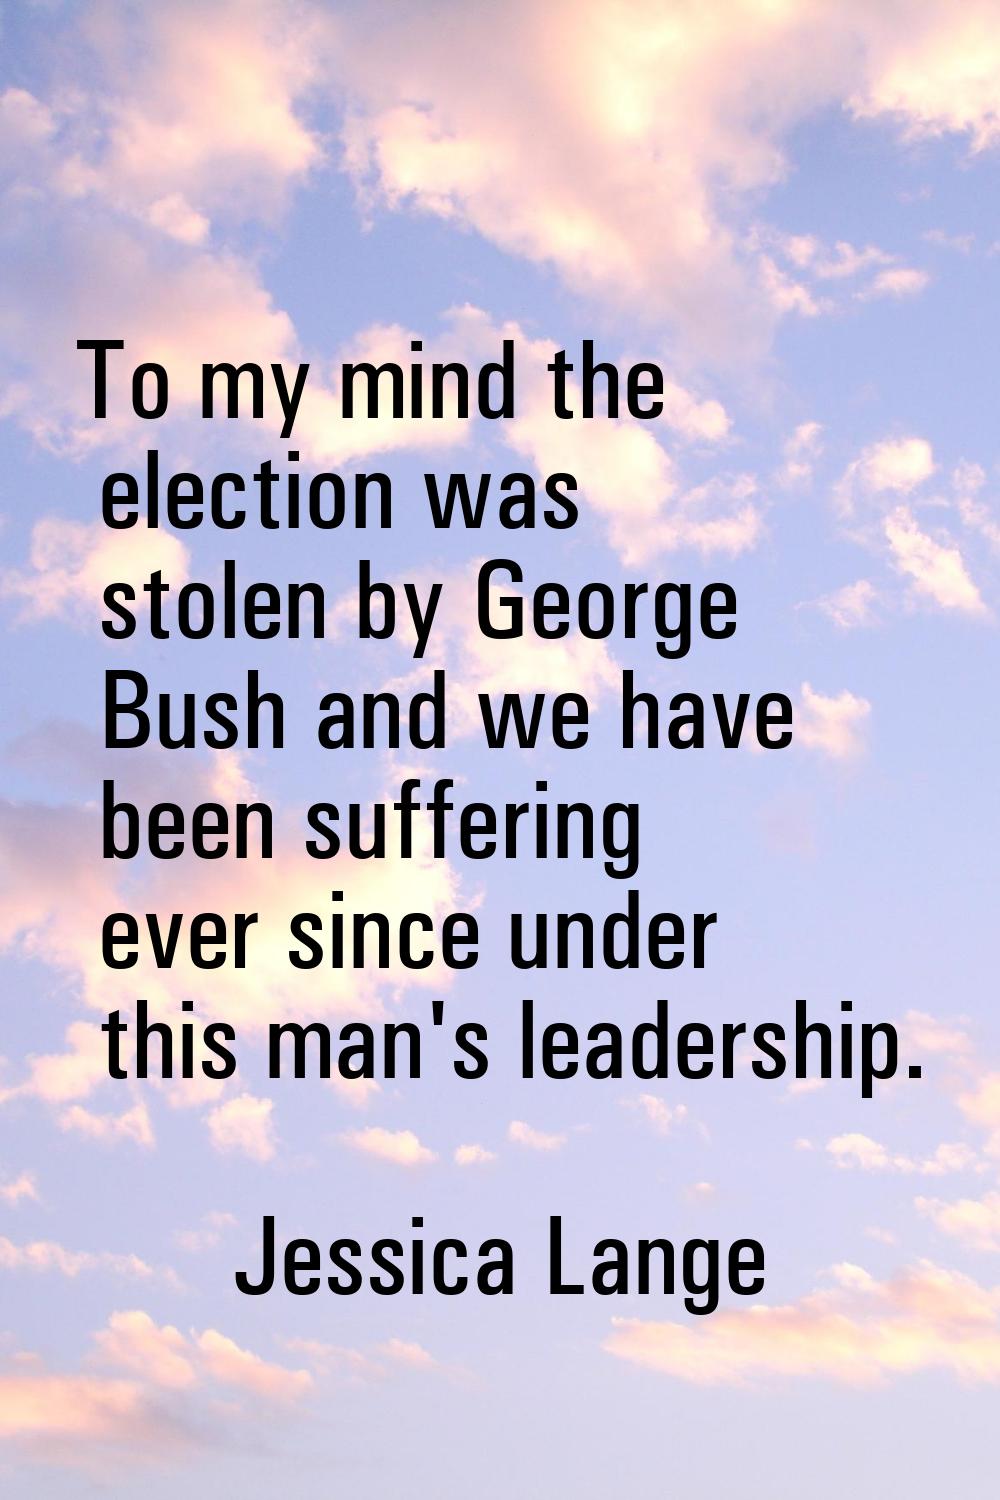 To my mind the election was stolen by George Bush and we have been suffering ever since under this 